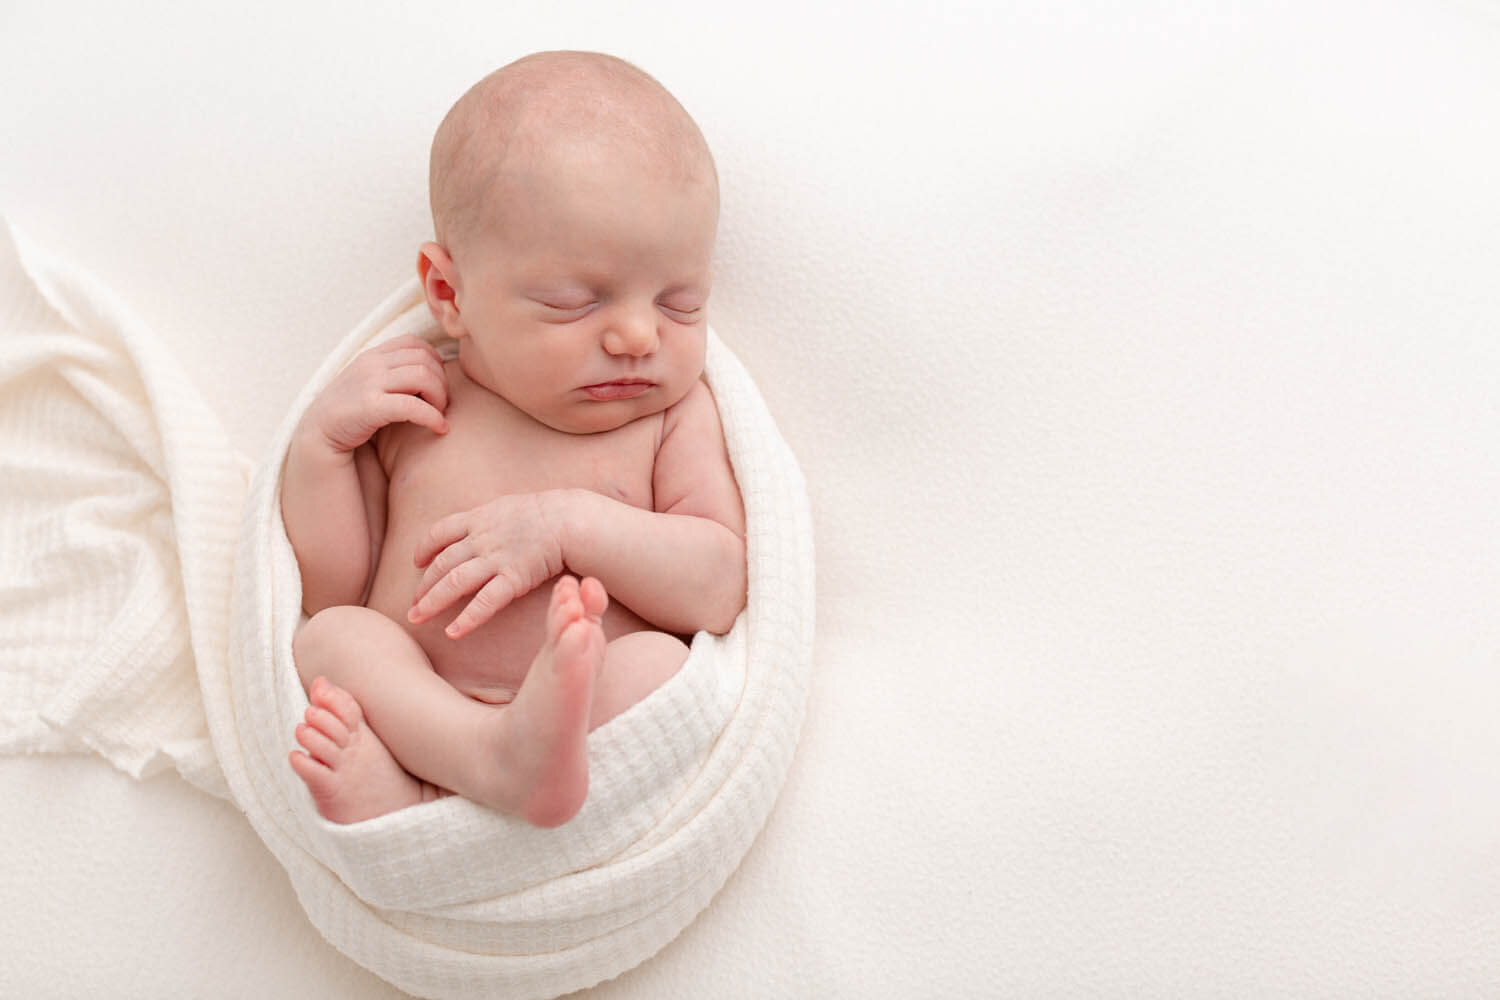 Newborn baby swaddled in white and sleeping peacefully on a white backdrop.